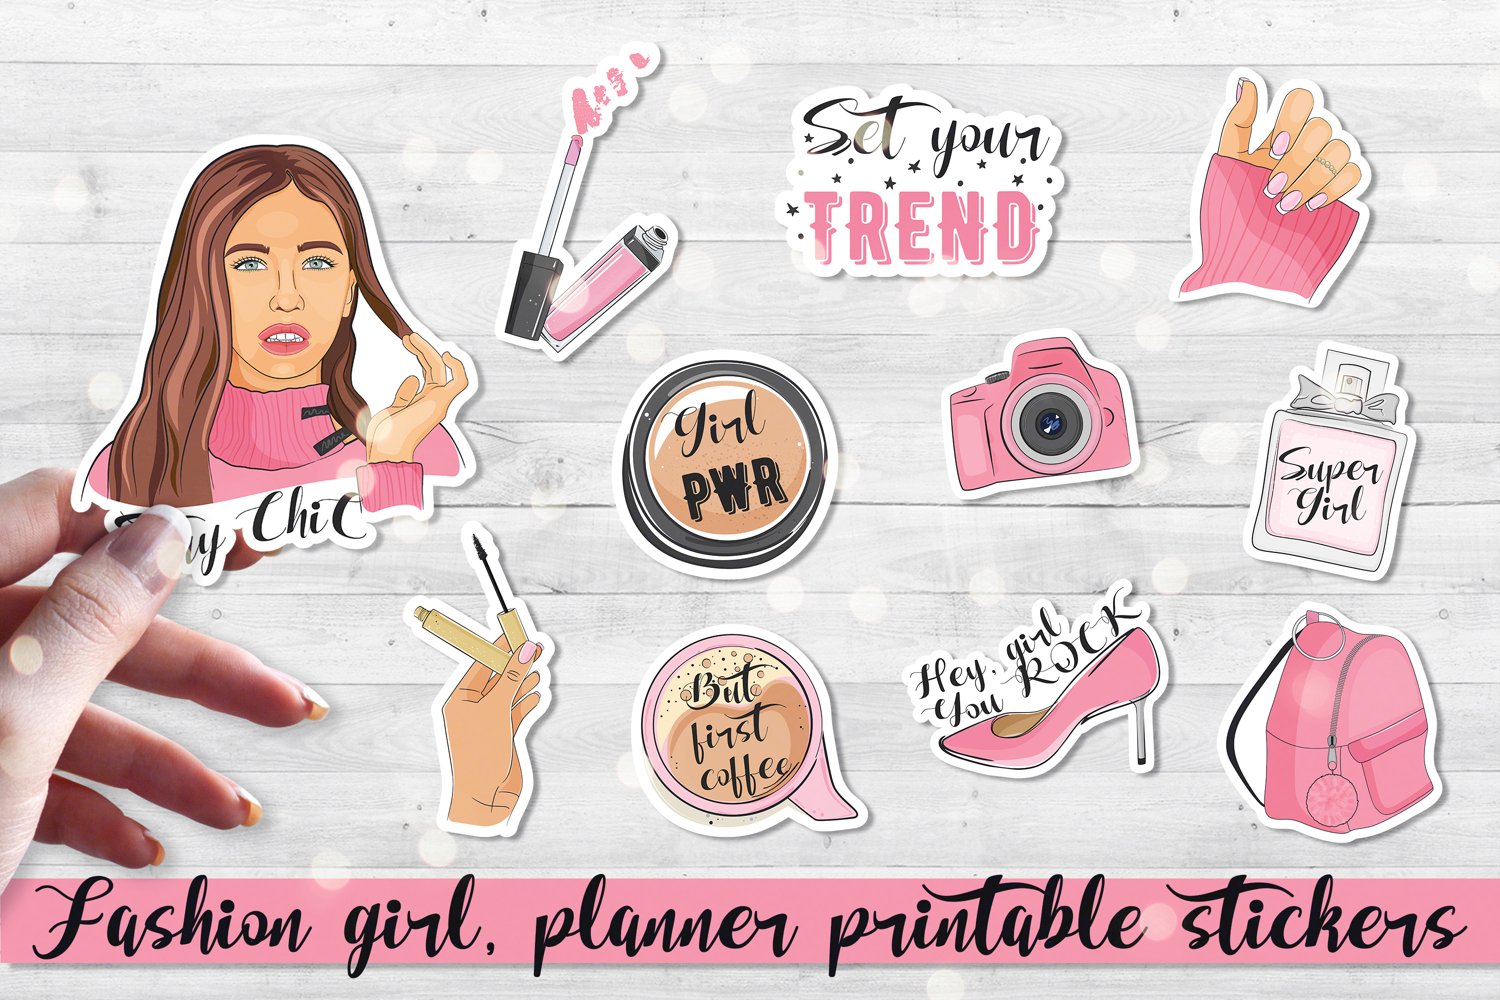 Fashion girl planner printable stickers.